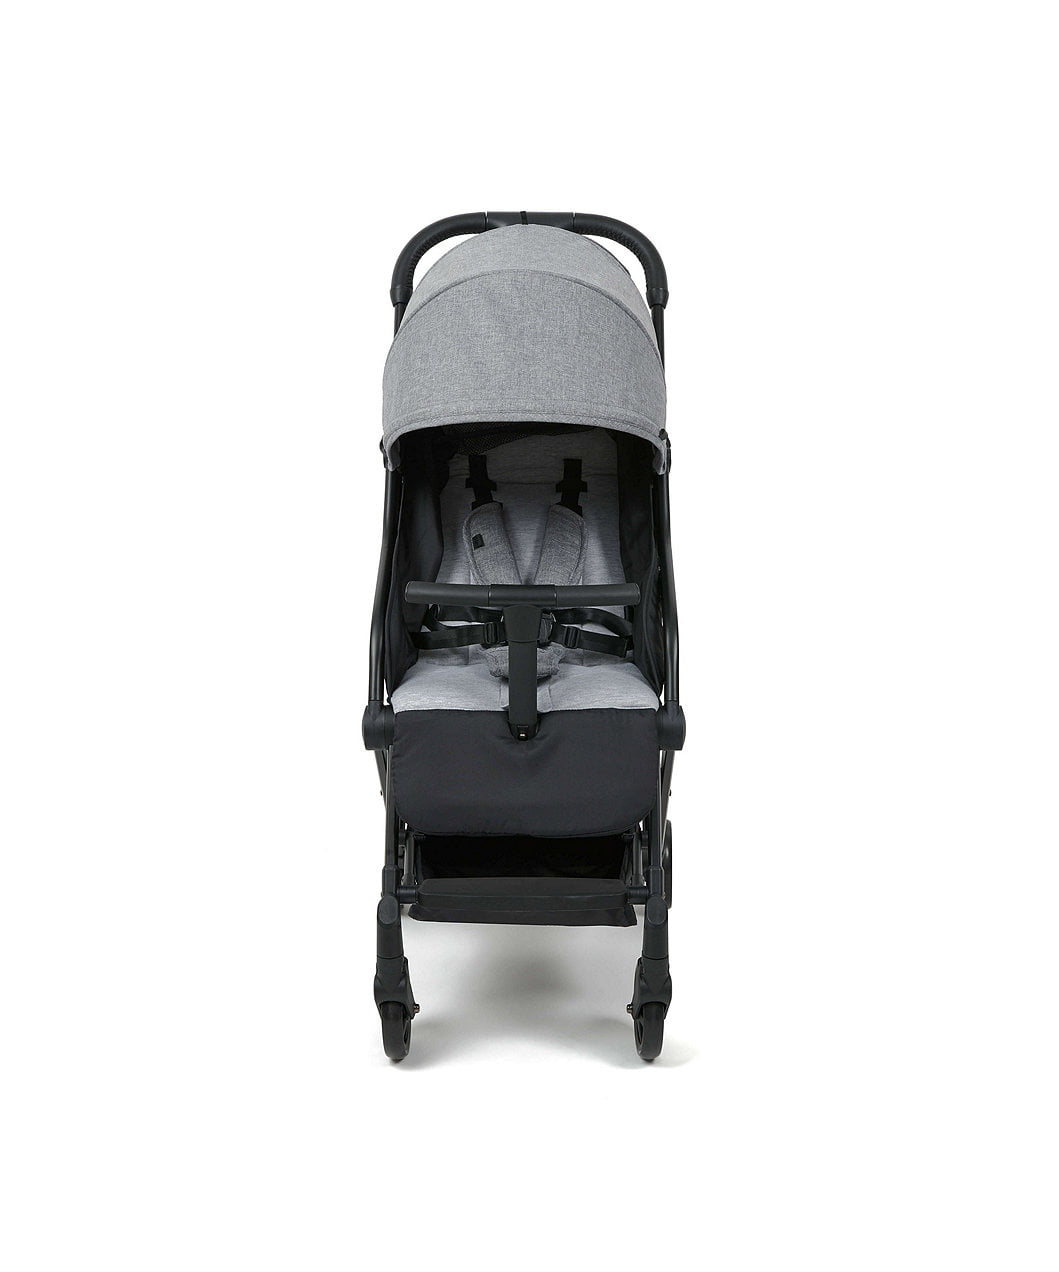 babylo explorer plus compact stroller review